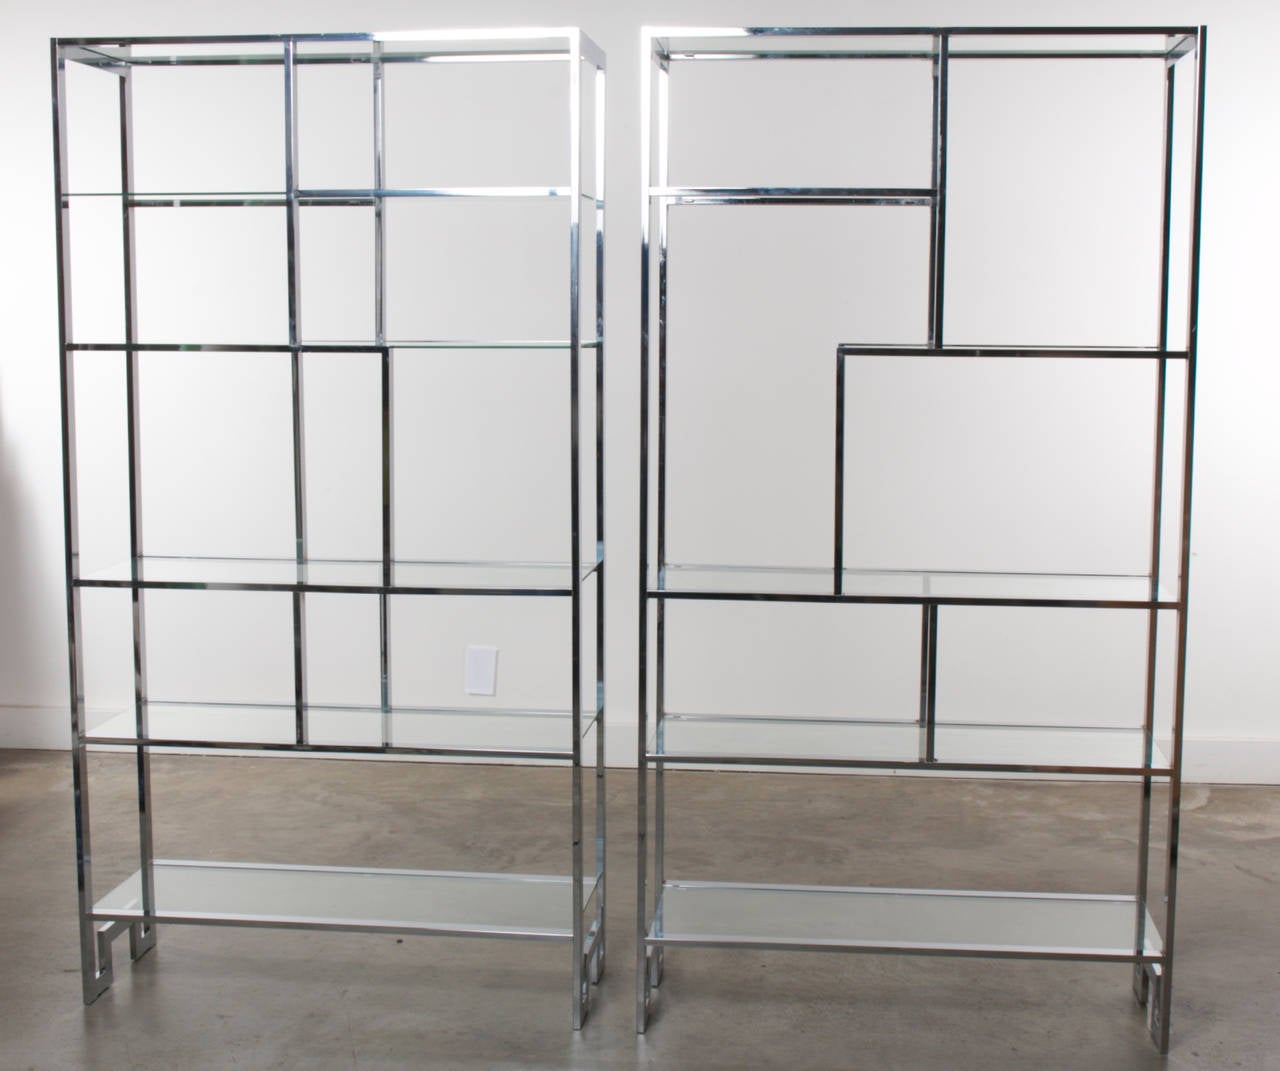 Geometrically shaped chrome frames are accented by glass shelves in this pair of vintage chrome etageres shelves by Milo Baughman for Thayer Coggin.  Made in the 1970's, each unit features a unique shelving configuration presented in matching chrome